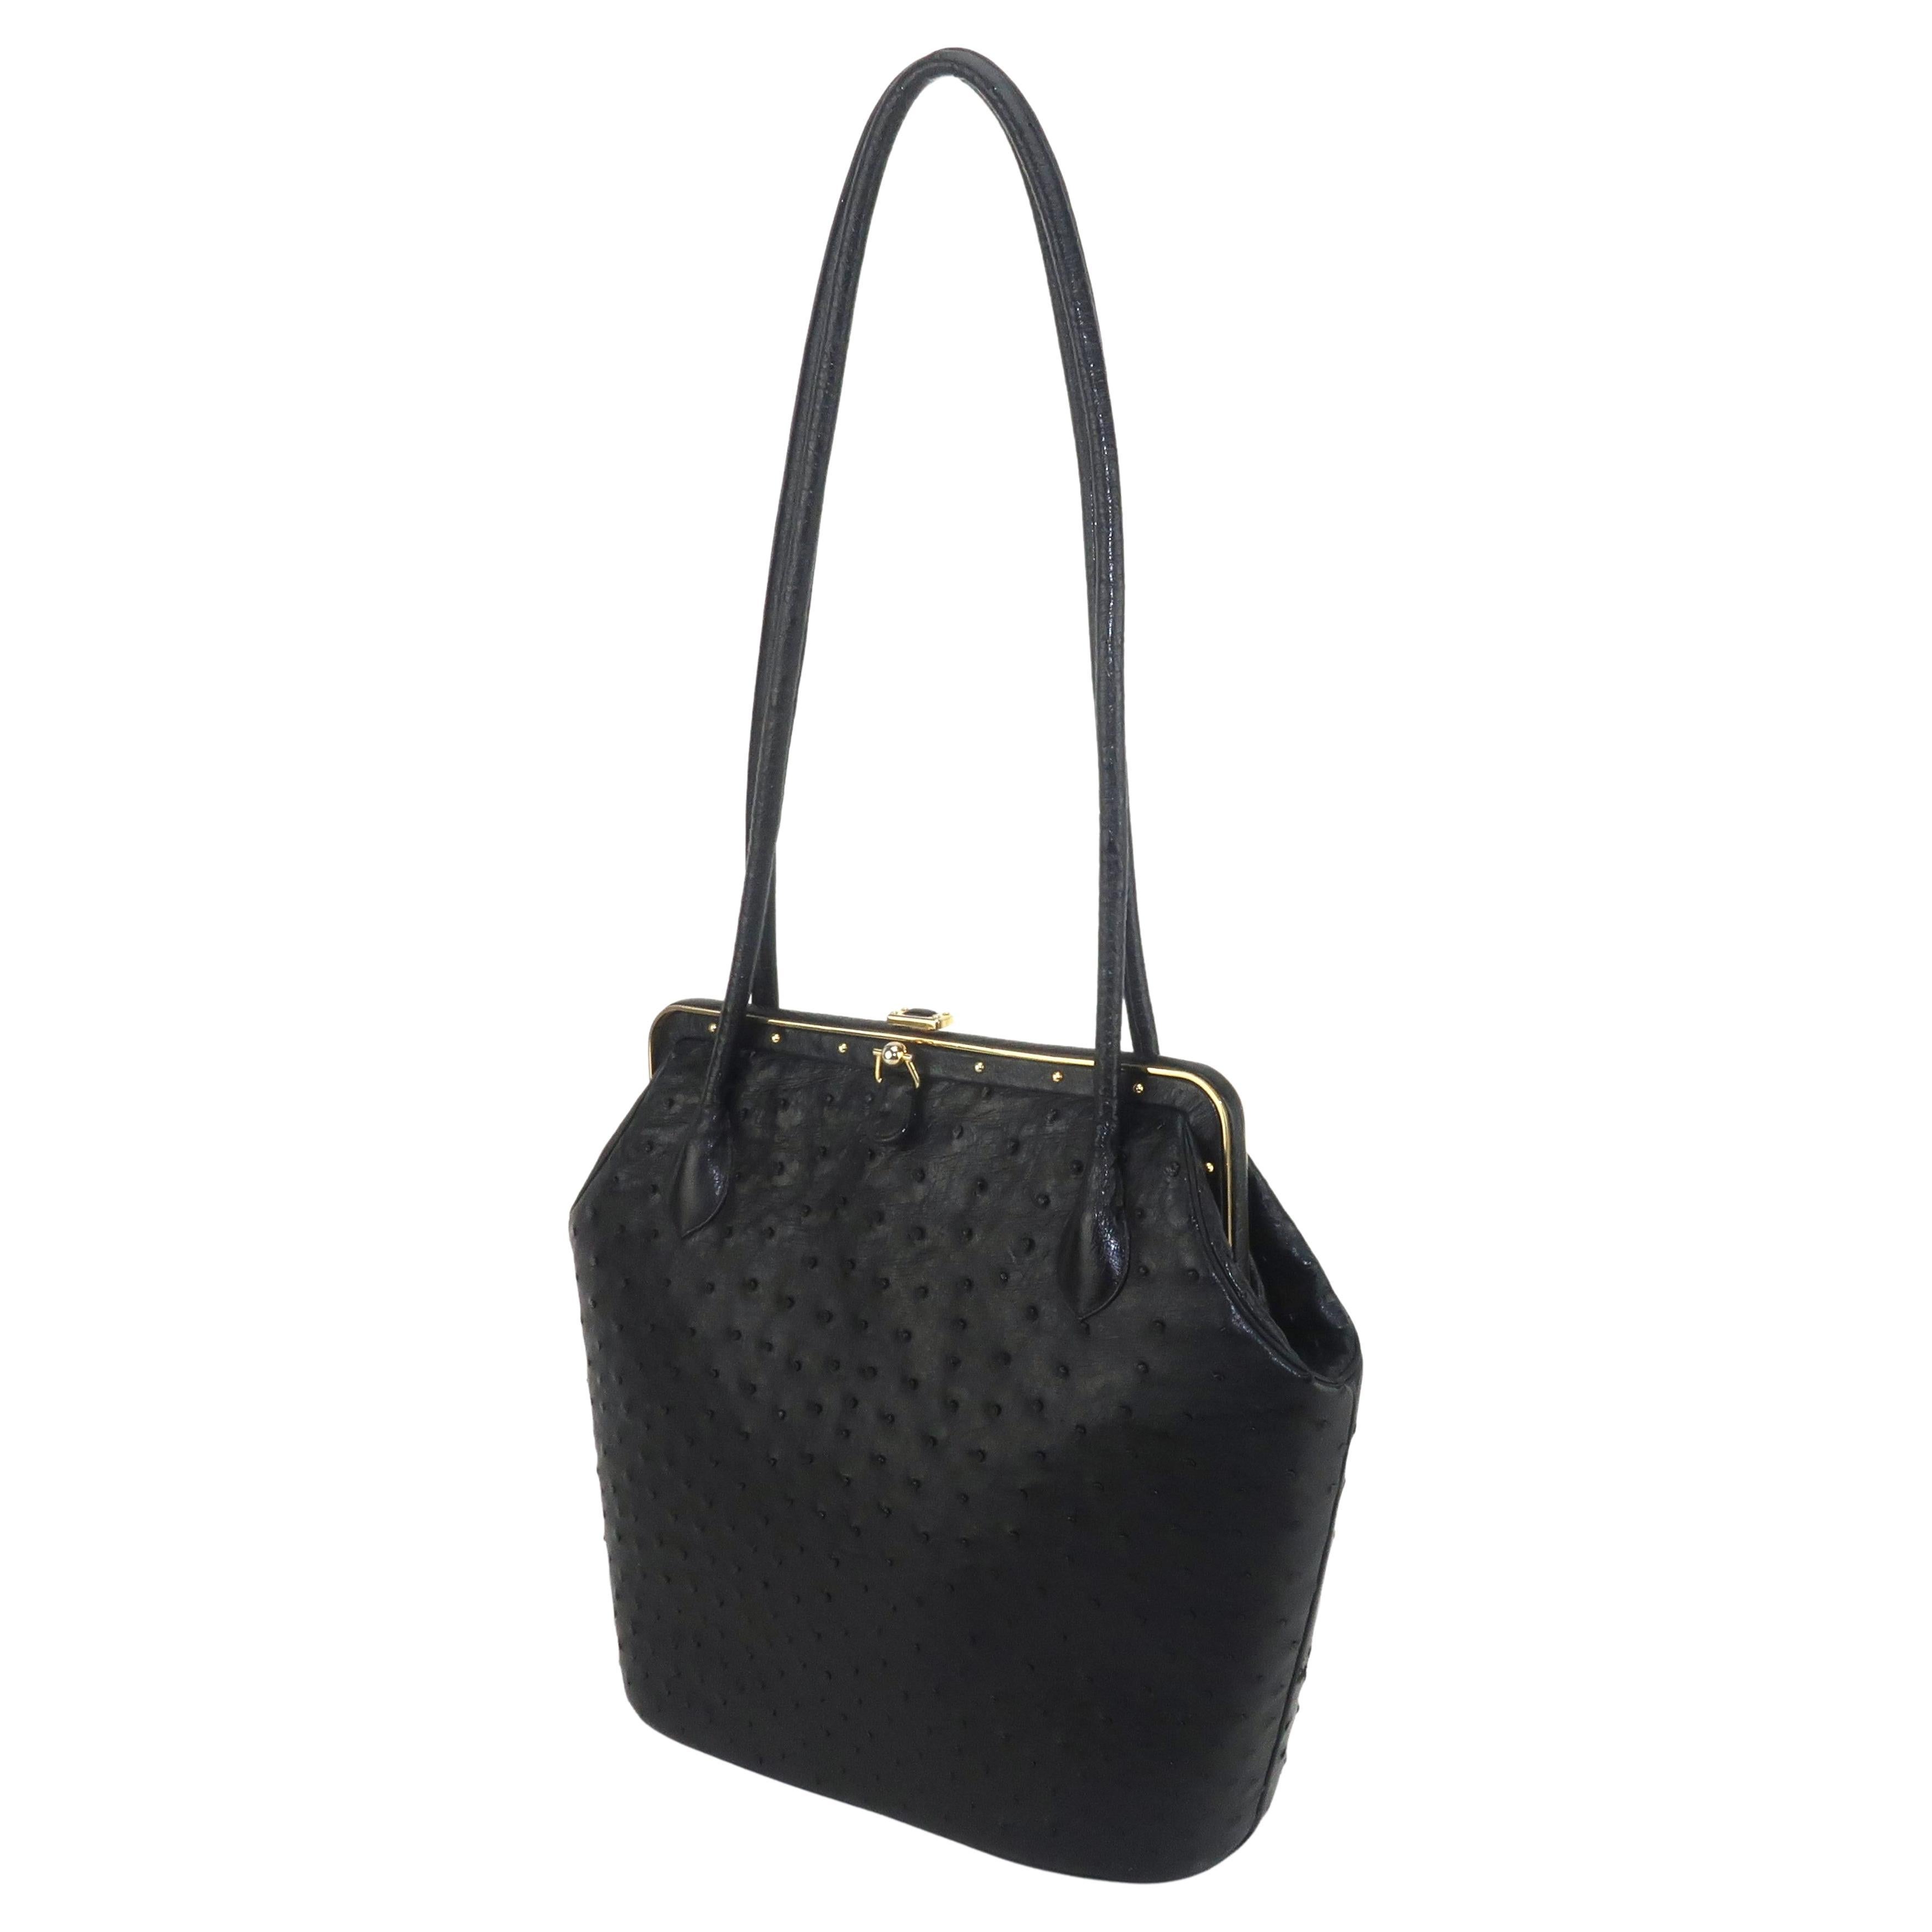 Judith Leiber Large Black Ostrich Leather Handbag With Gold Studs For Sale